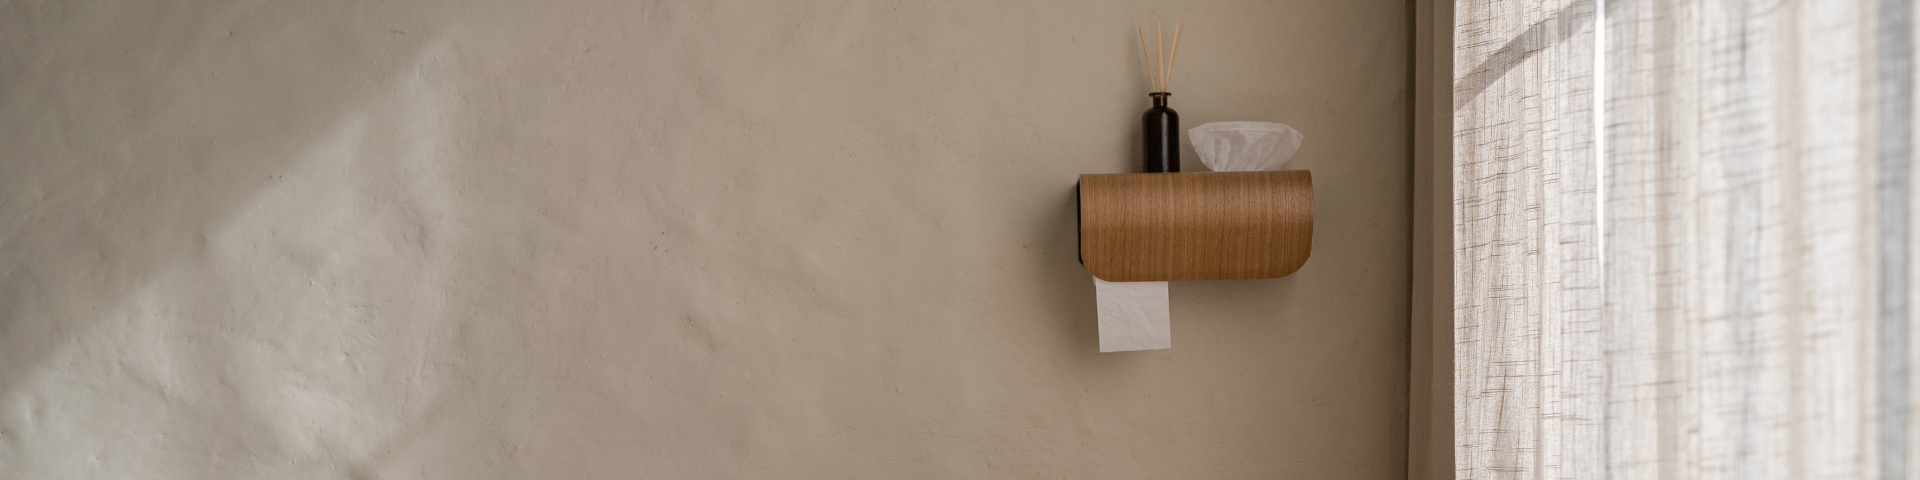 CAPTAIN wooden wall-mounted toilet roll holder w/ wet wipes dispenser